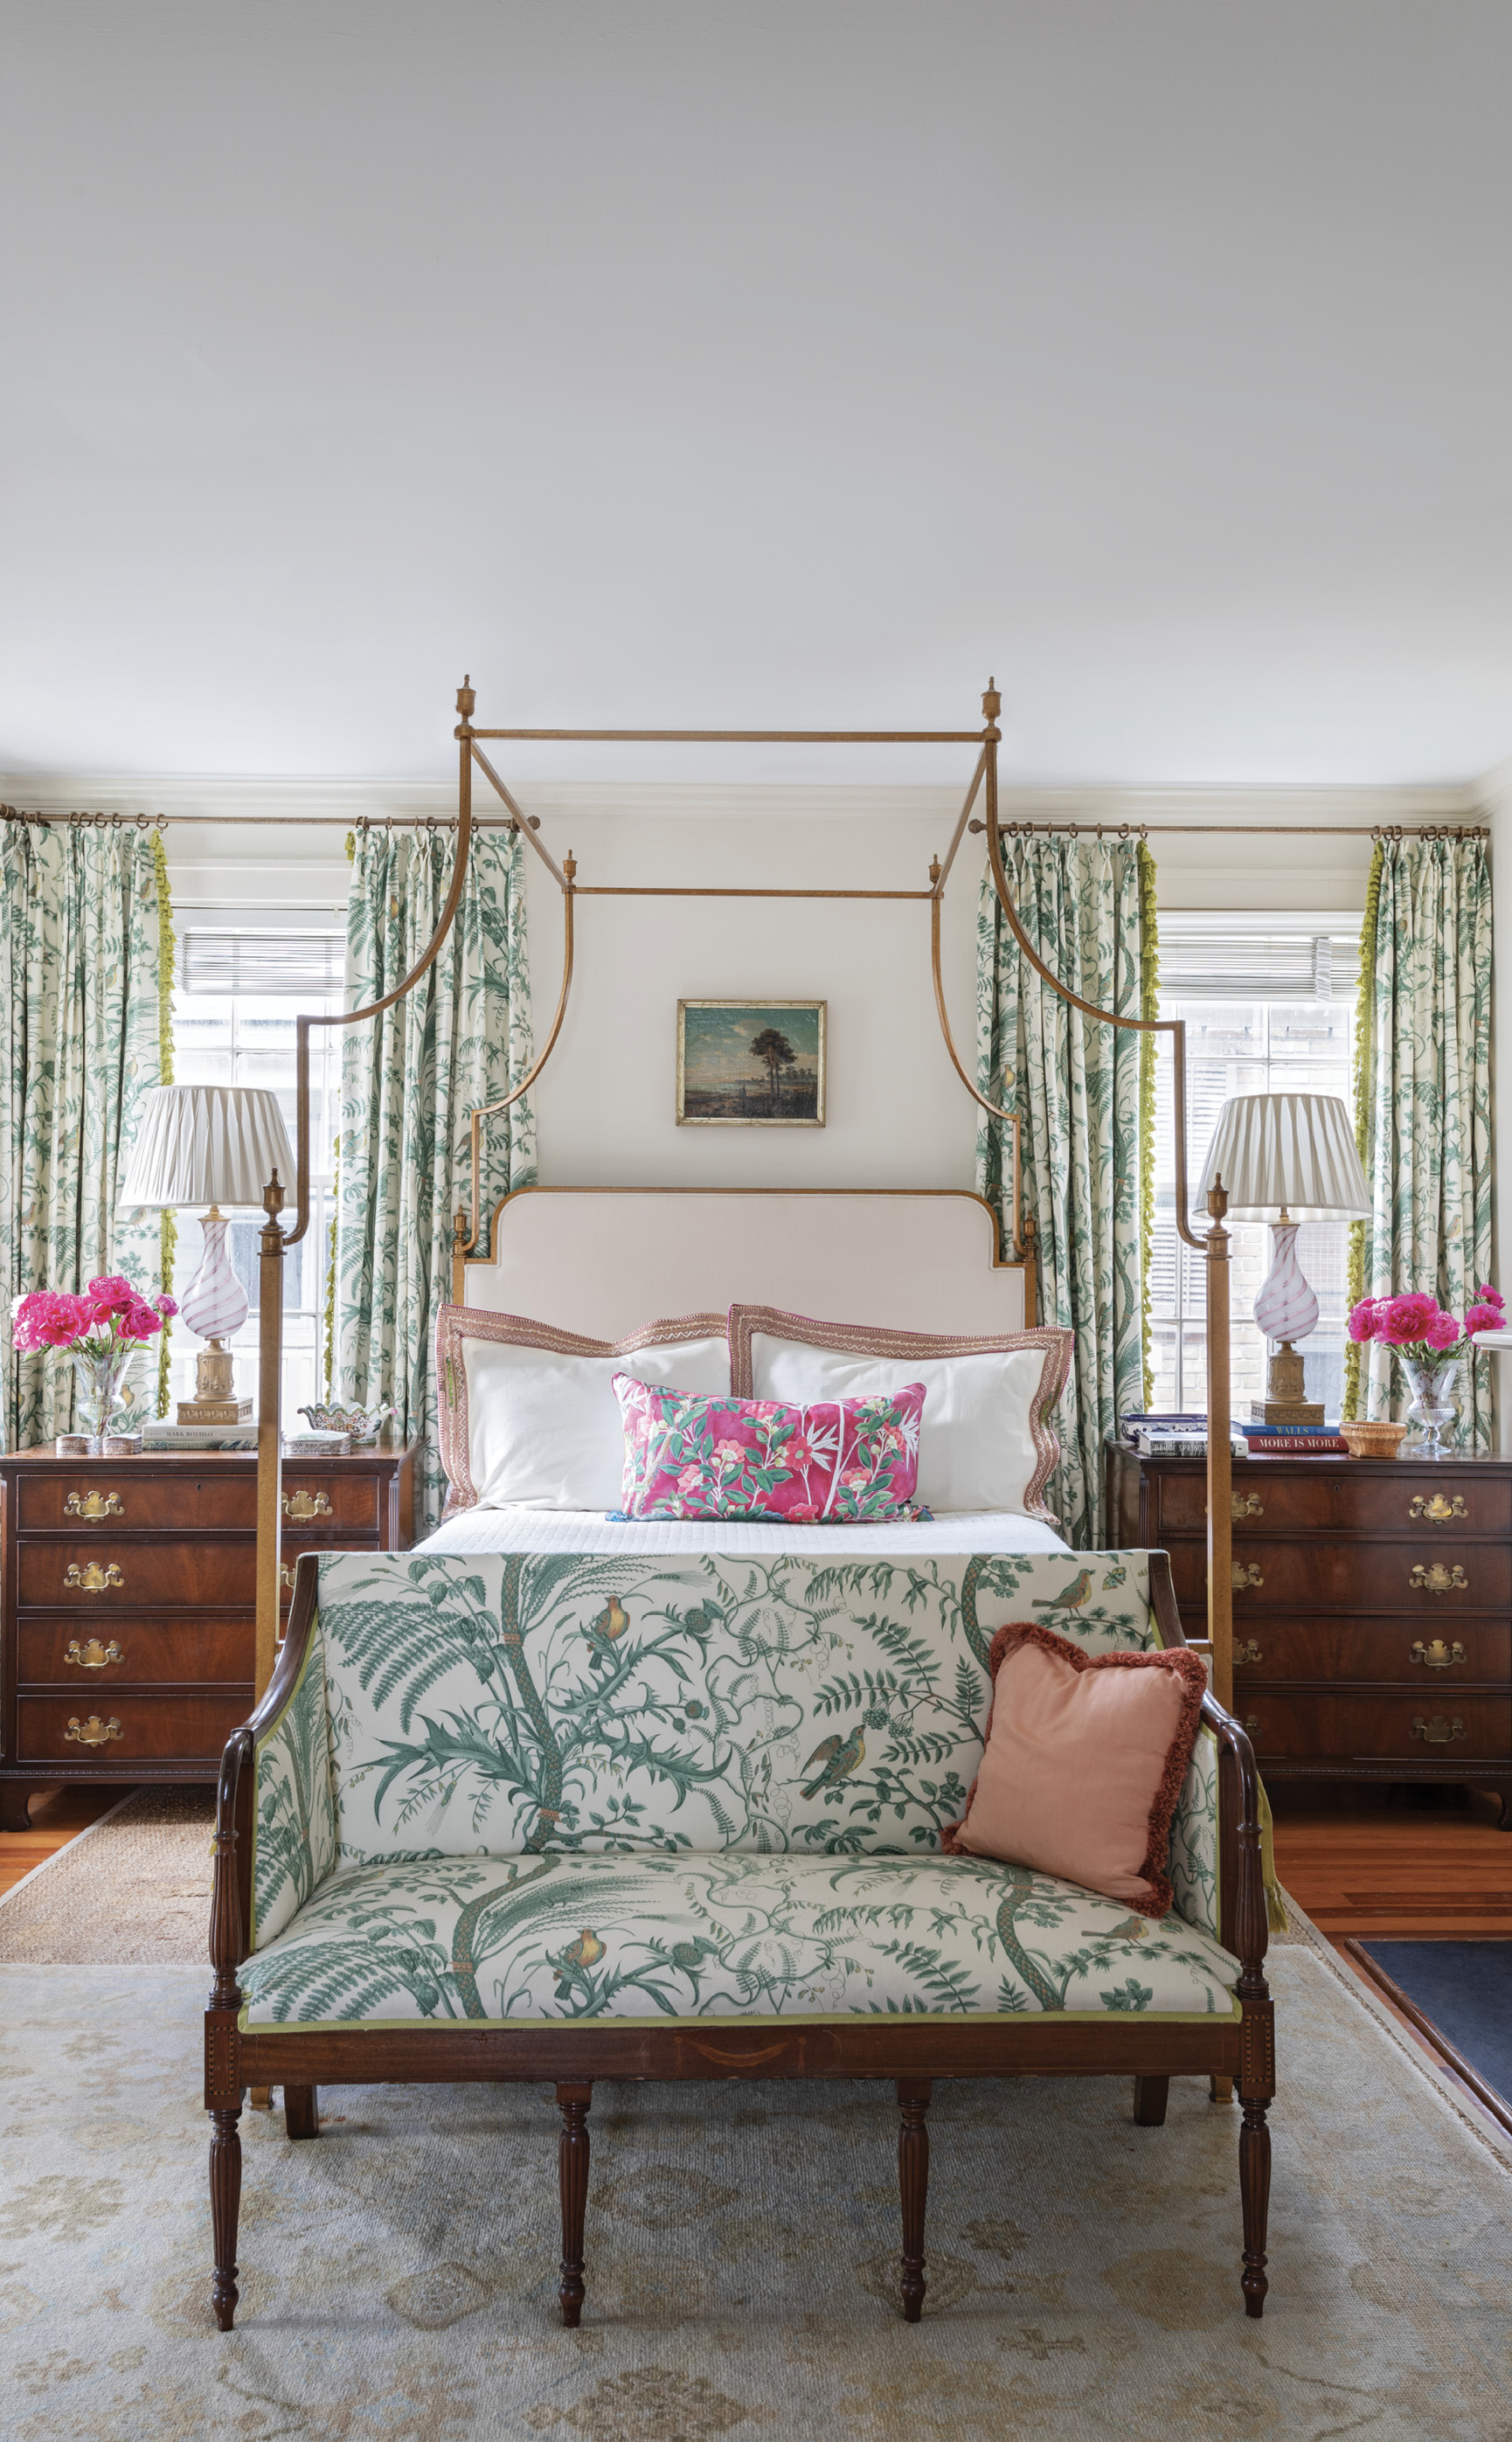 FIT FOR A QUEEN: A quieter color palette in the primary bedroom creates a soothing, luxurious space. The delicate design of the Brunschwig &amp; Fils “Bird &amp; Thistle” toile fabric for the curtains and the antique Sheraton settee, the brass four-poster bed, and vintage Murano glass lamps combine to produce a light and feminine feel. The theme continues in the bath with a white Carrara marble tiled tub and vanity highlighted with accents of Kelly green.